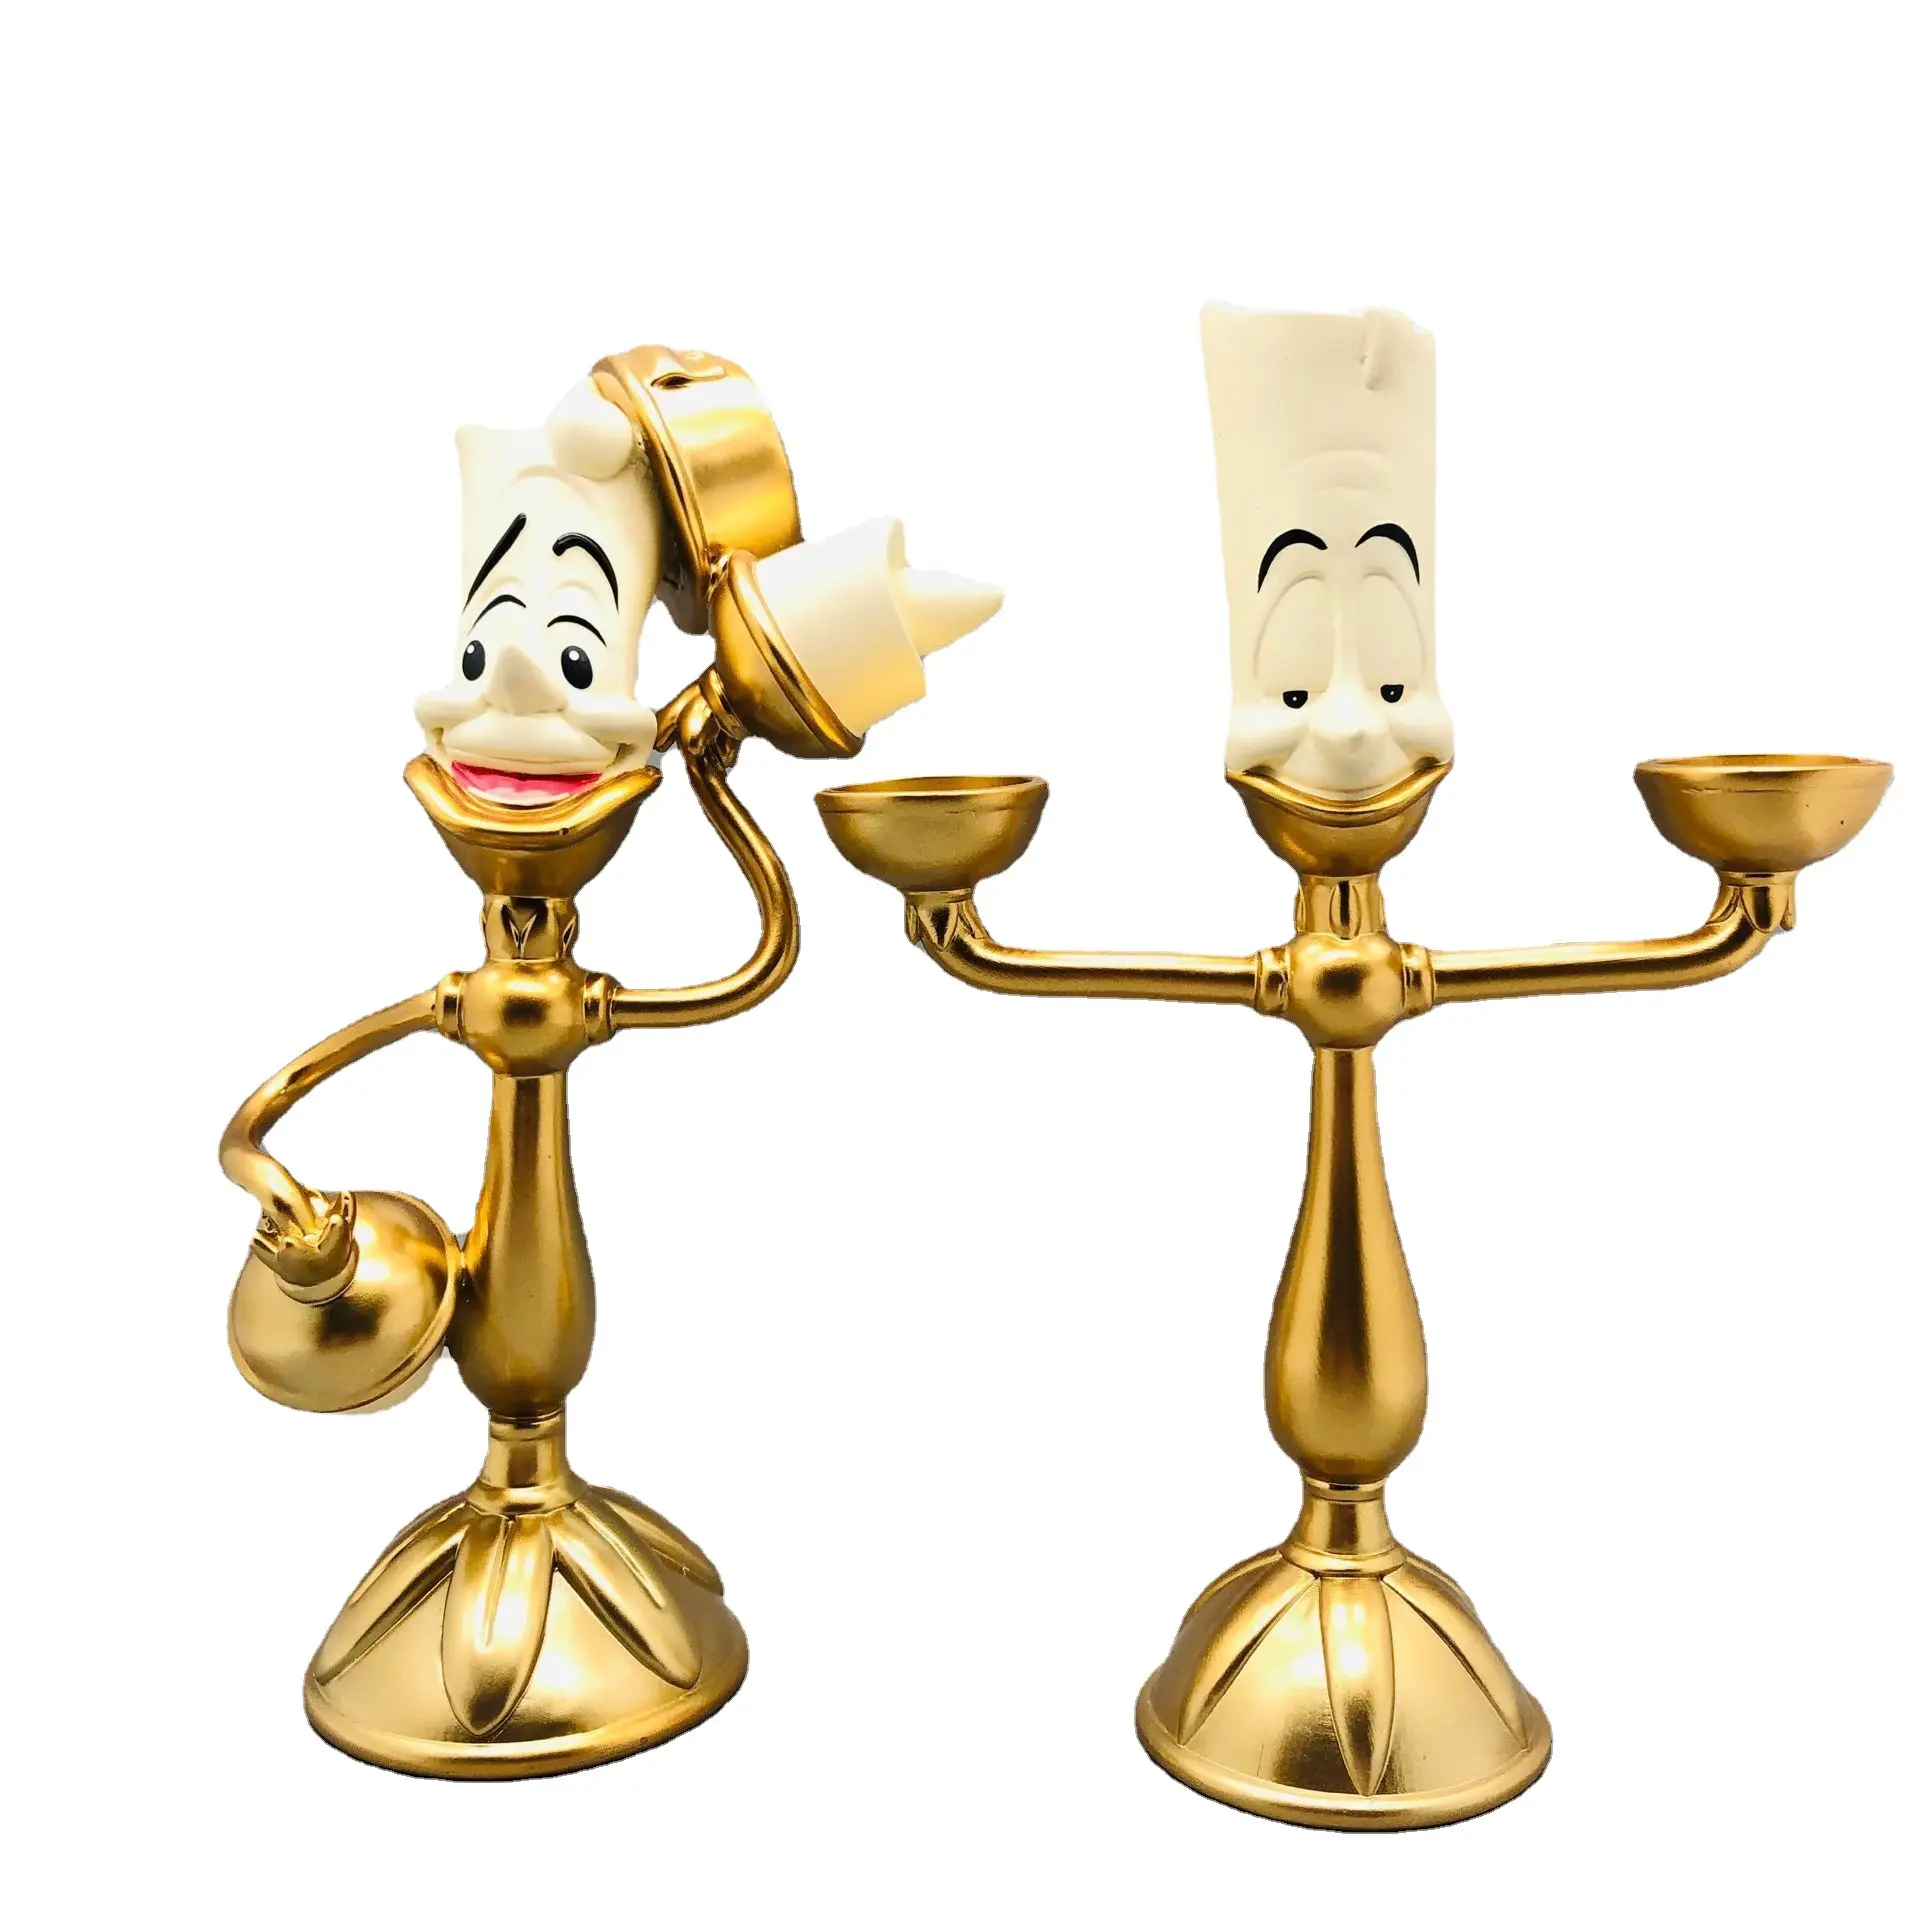 3 heads gold candle holder lovely cartoon figurine candlestick alarm clock collection gifts for home wedding table decoration